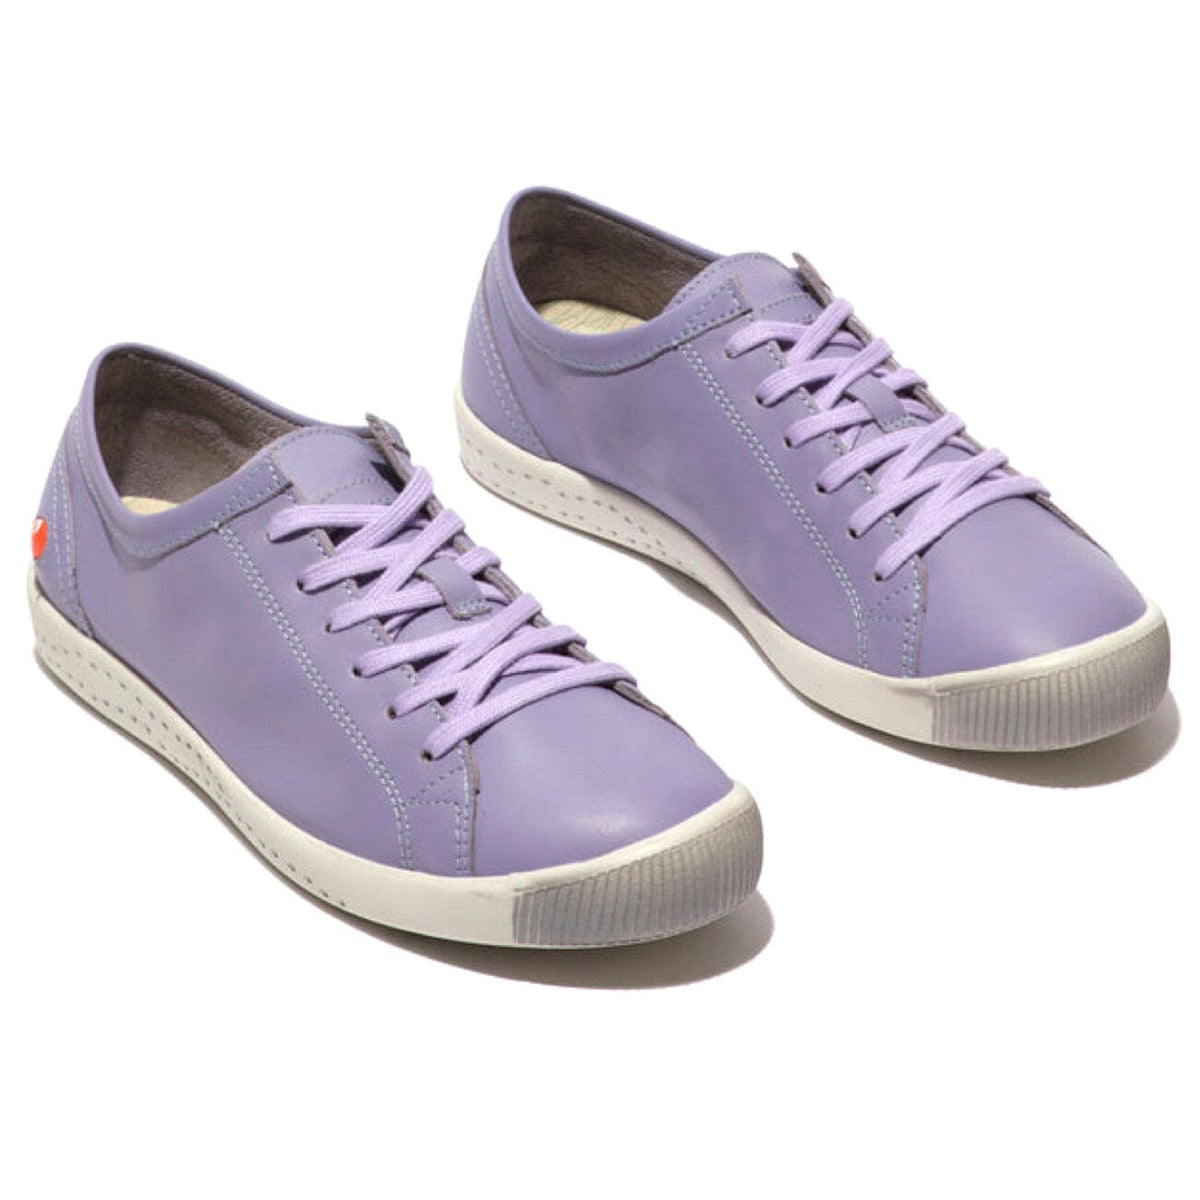 Softinos, Isla154, Laceup Shoe, Smooth Leather, Violet Shoes Softinos Violet 37 